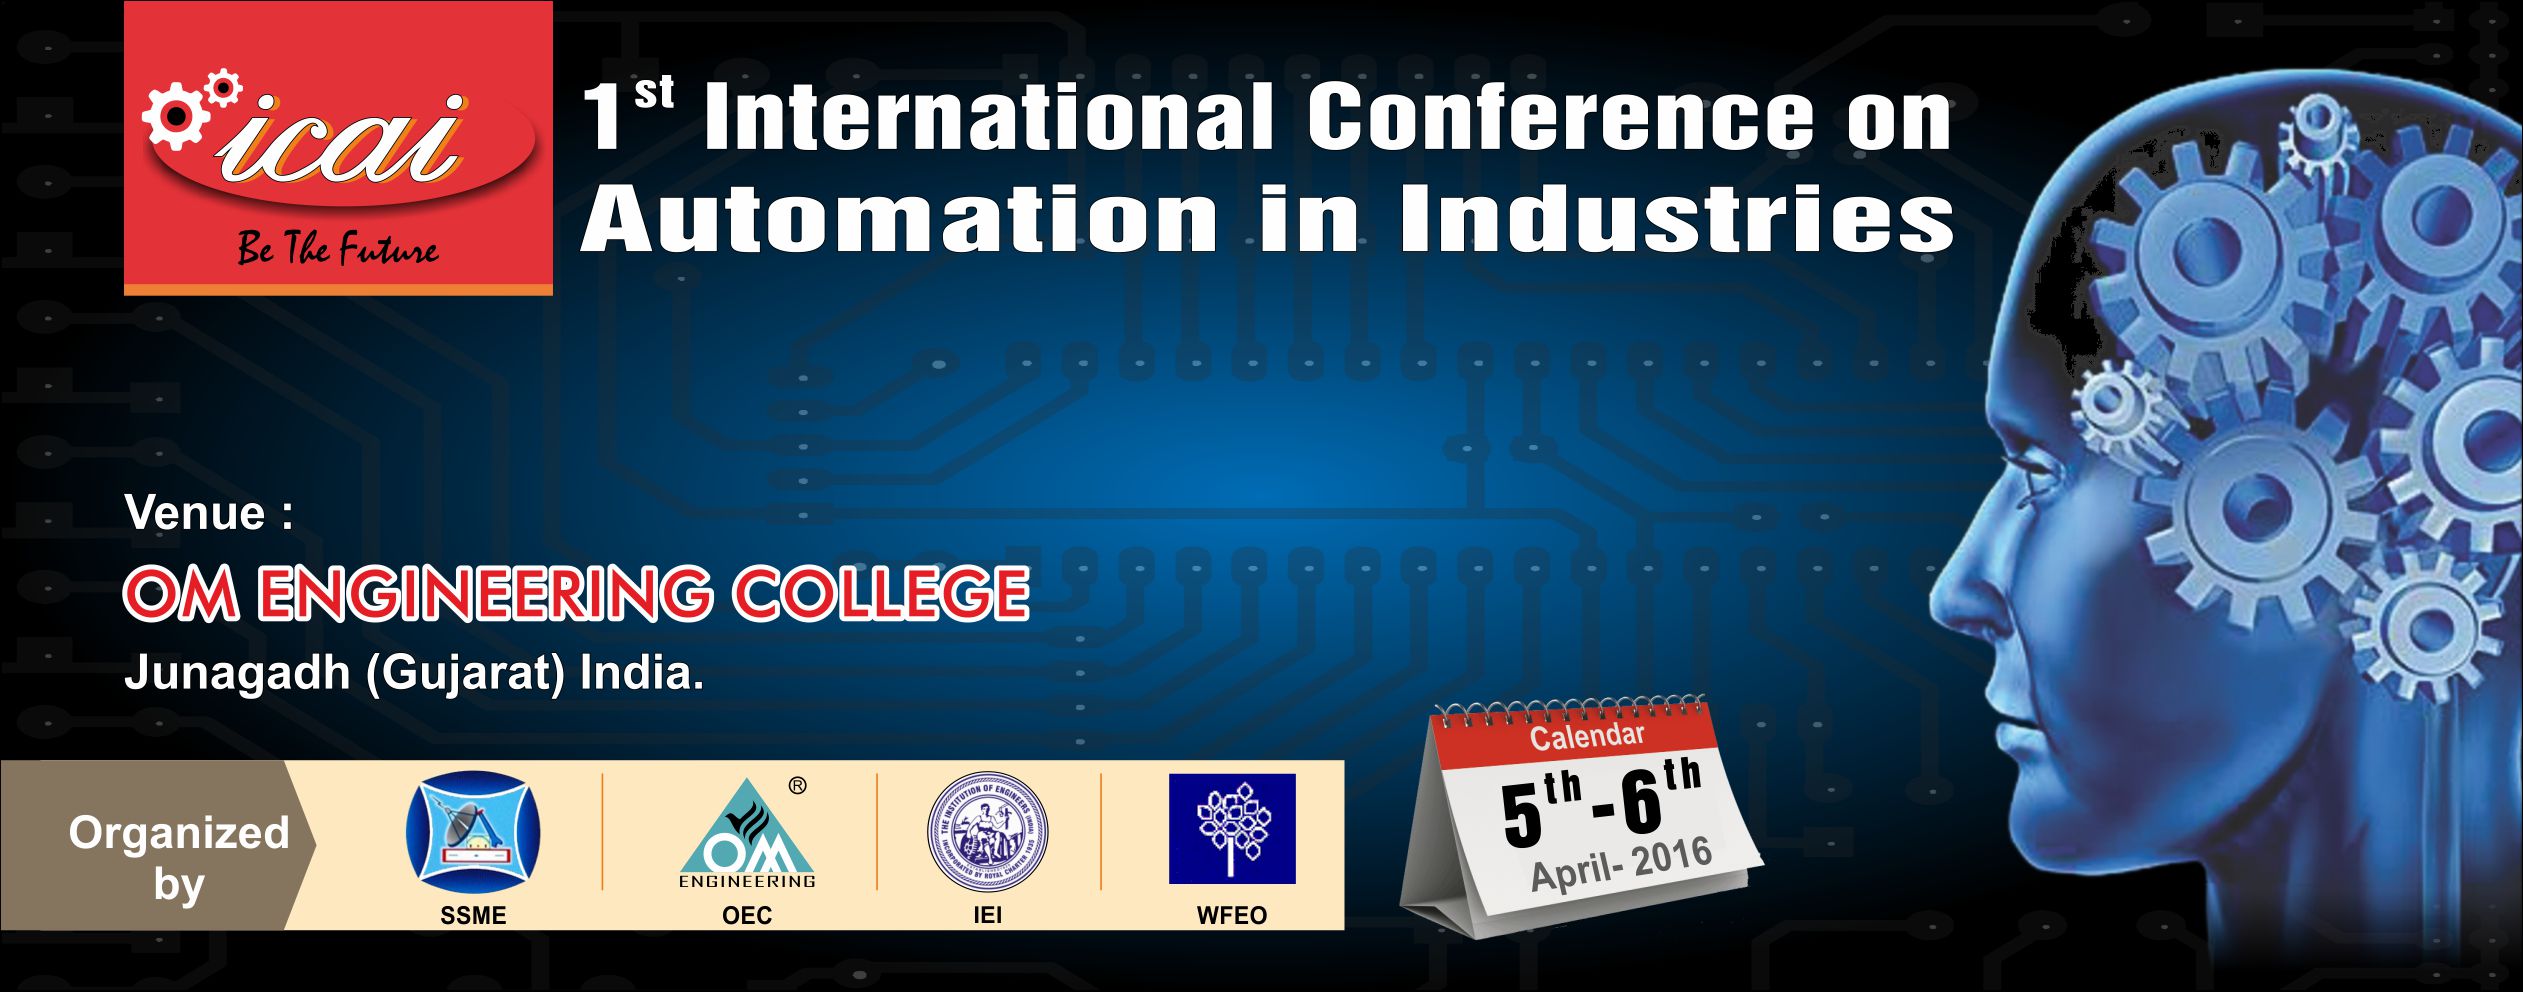 International Conference on Automation in Industries, Junagadh, Gujarat, India